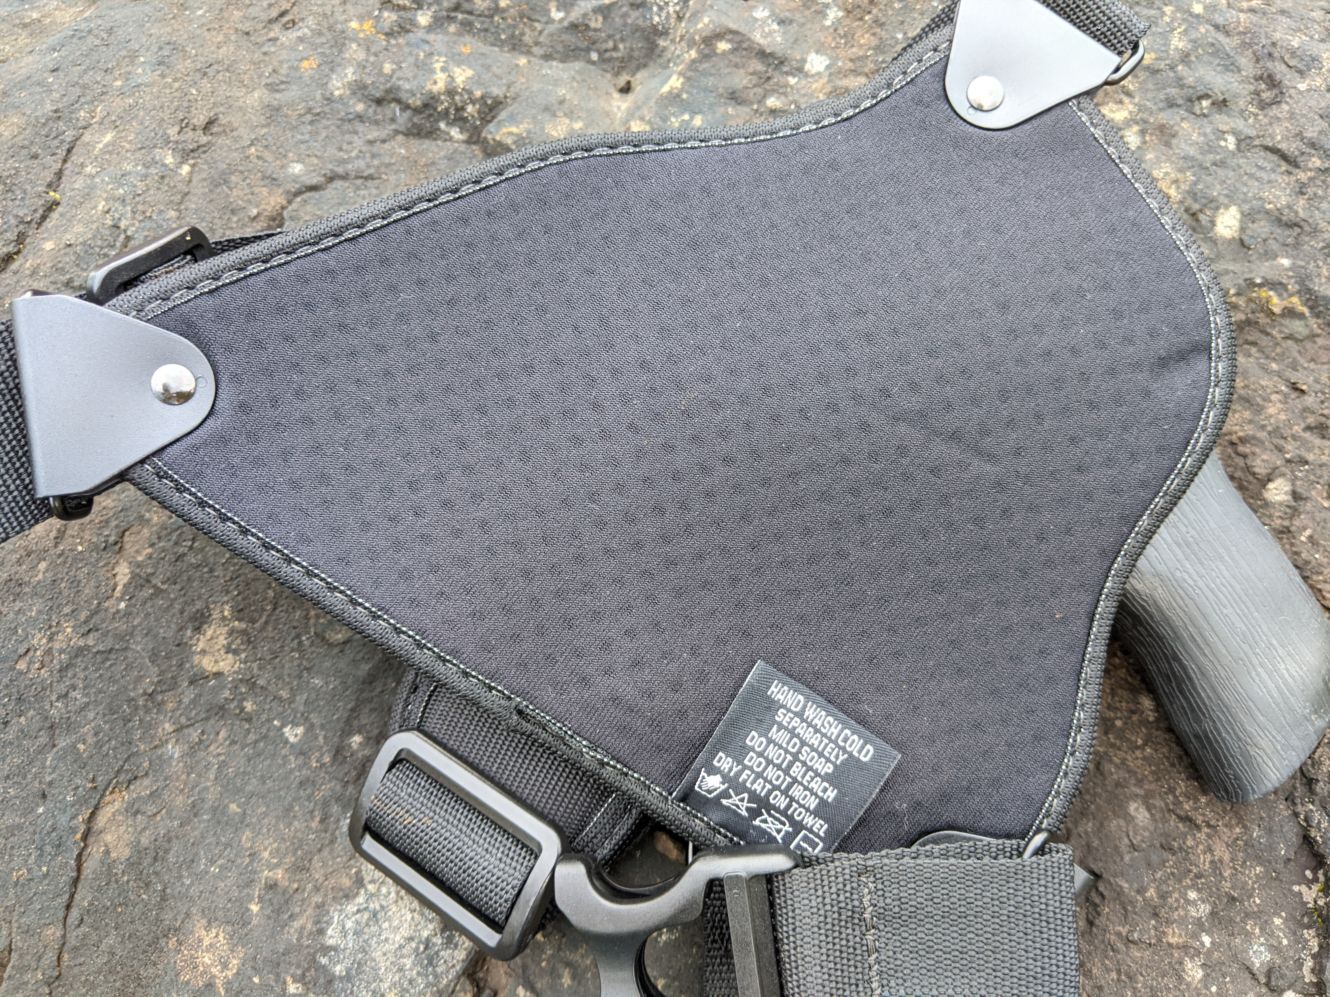 breathable Neoprene backing of the Alien Gear Cloak Chest Holster for the Chiappa Rhino 200DS